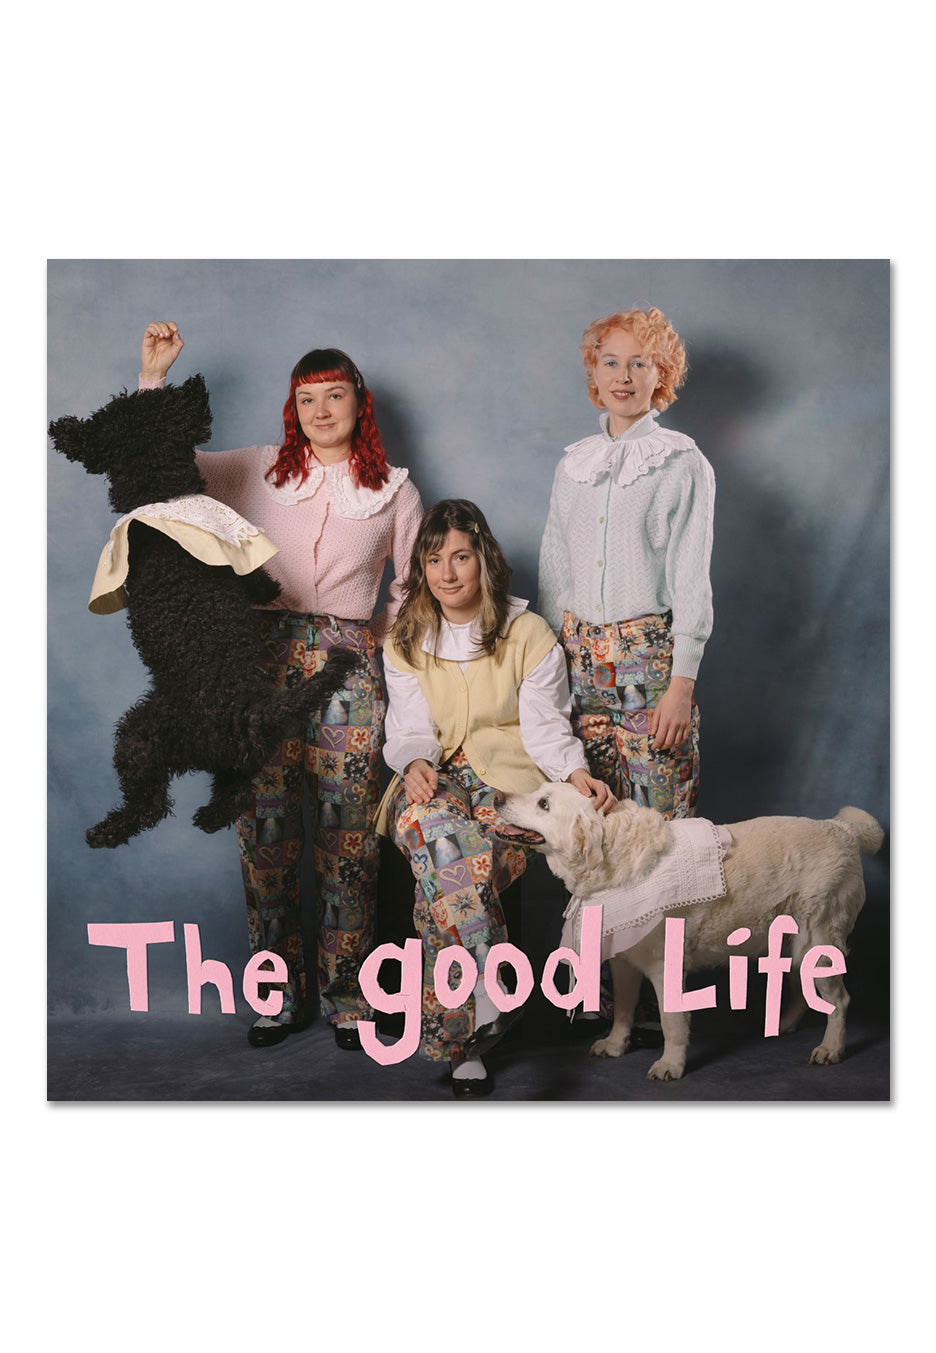 My Ugly Clementine - The Good Life (Limited) Transparent Blue - Colored Vinyl